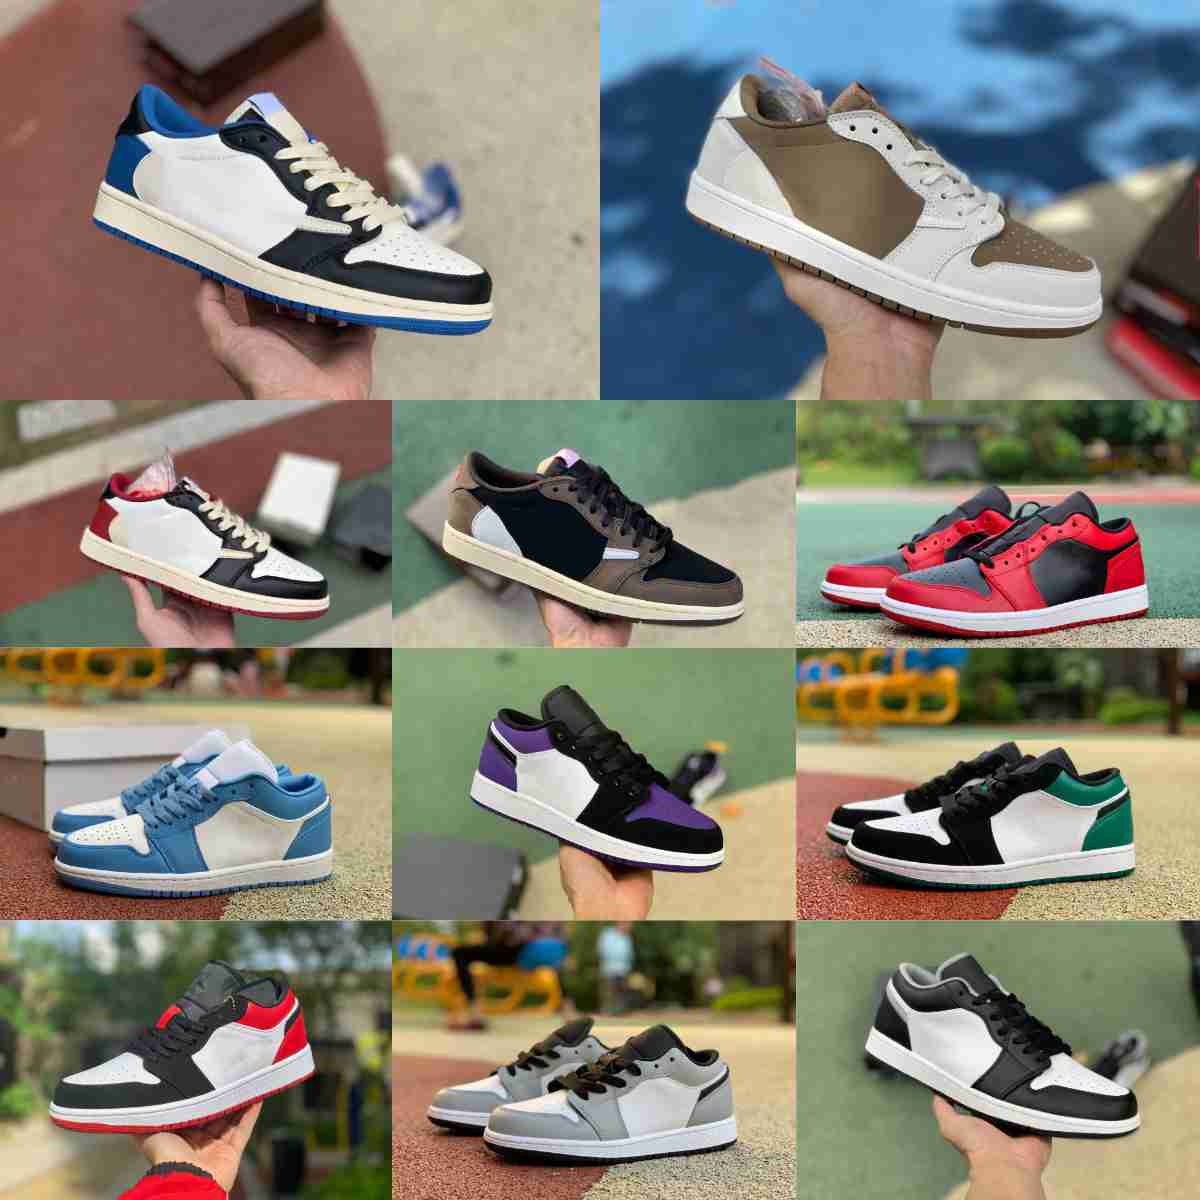 

2023 Fragment TS Jumpman X 1 1S Low Basketball Shoes White Brown Red Gold Grey Toe UNC Camo Purple Black Shadow Panda Emerald Crimson Tint Designer Sports Sneakers, Please contact us